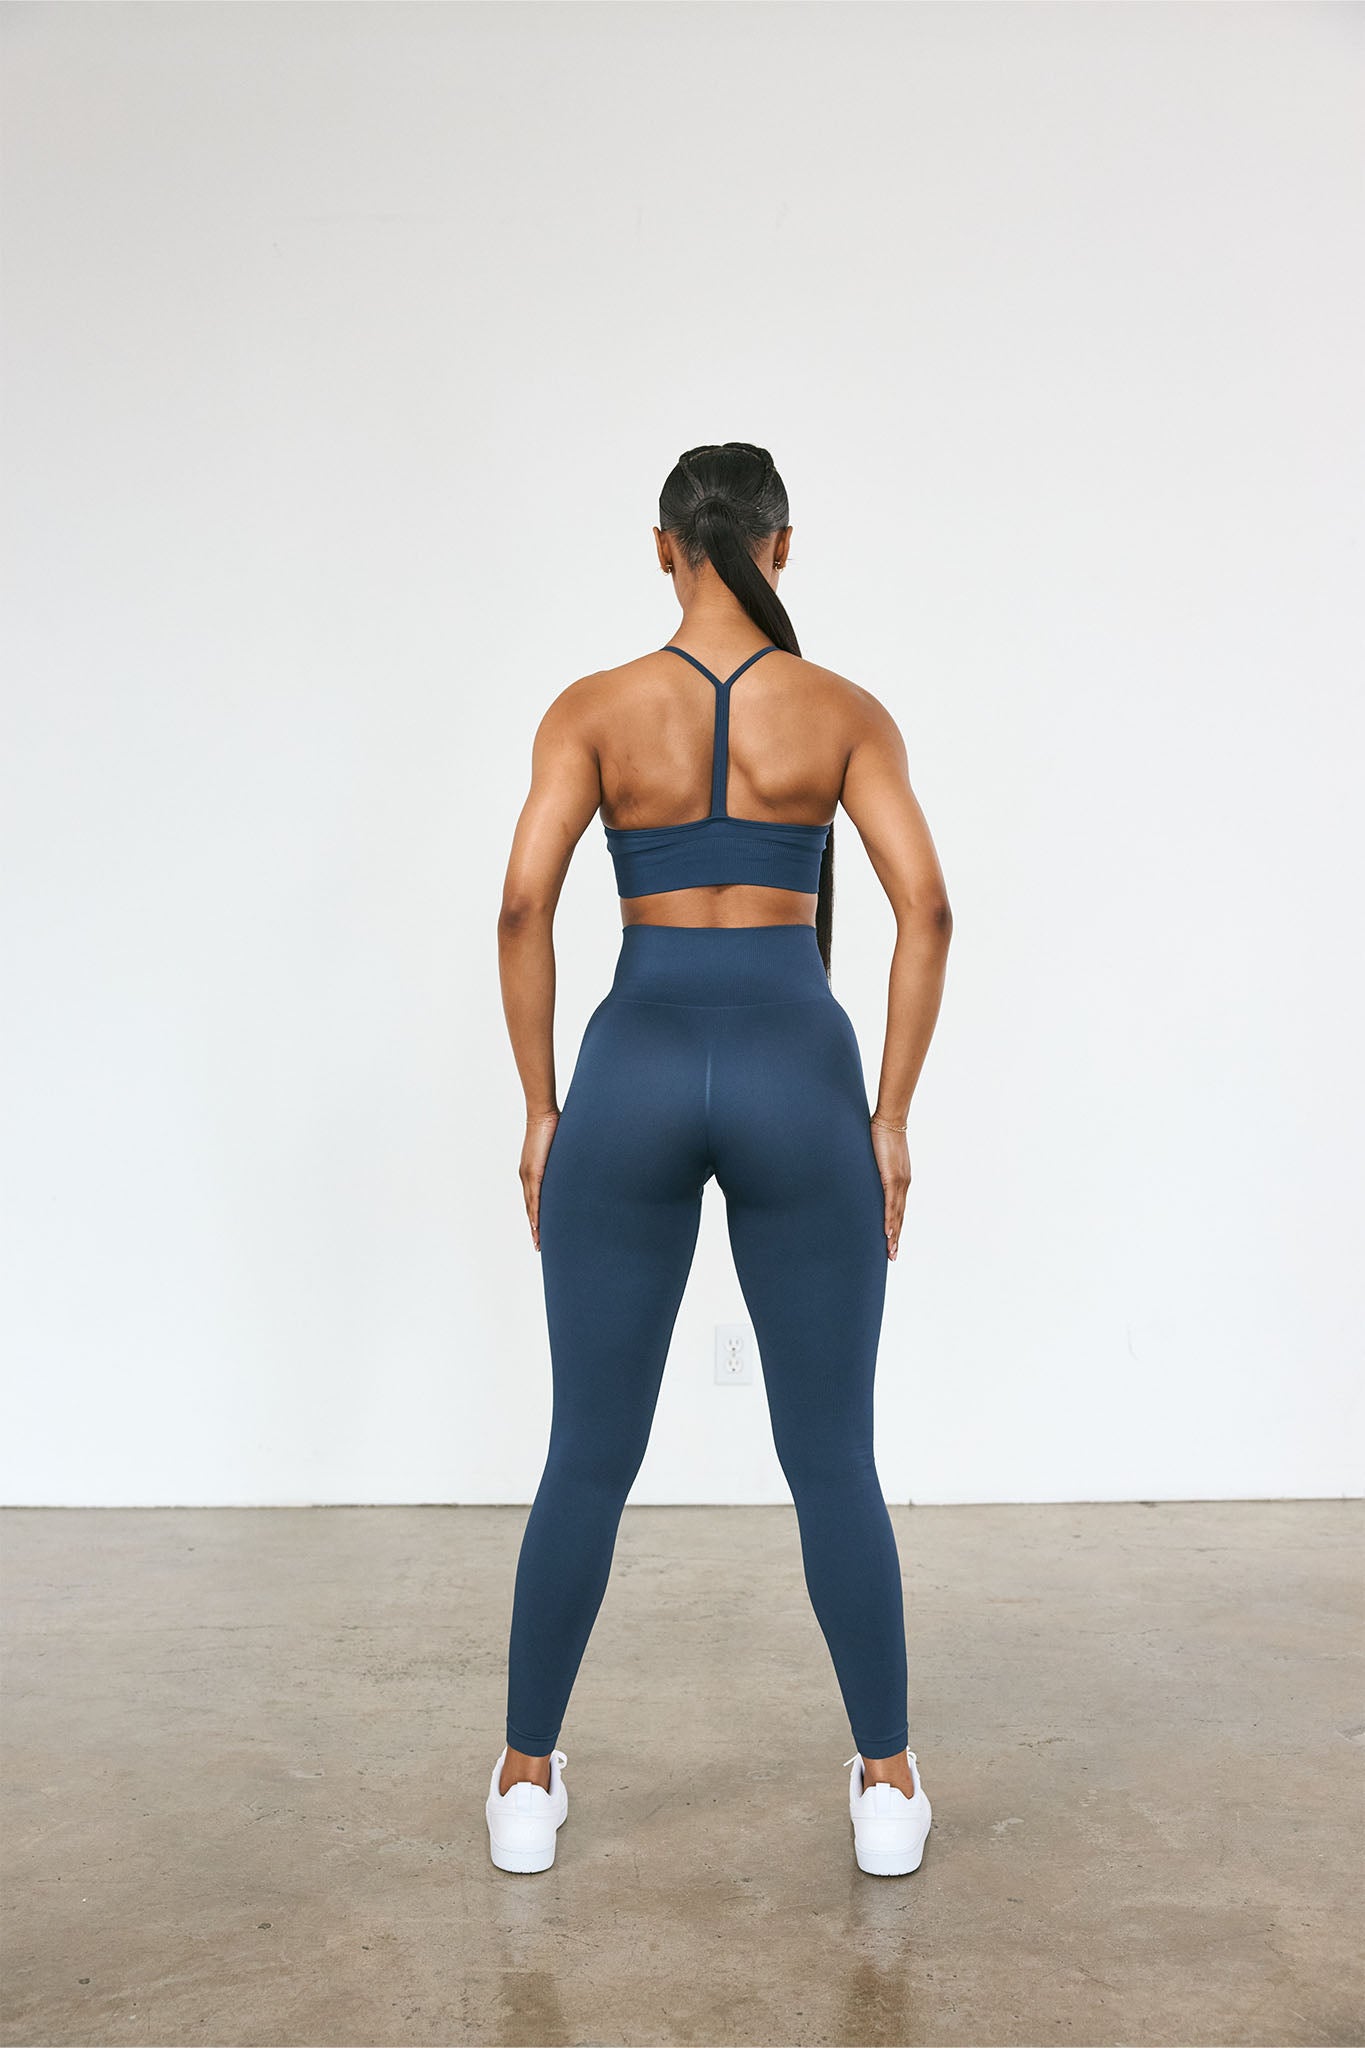 Zentoa.com 4 the Perfect Leggings  Perfect leggings, Gym outfit, Fitness  body